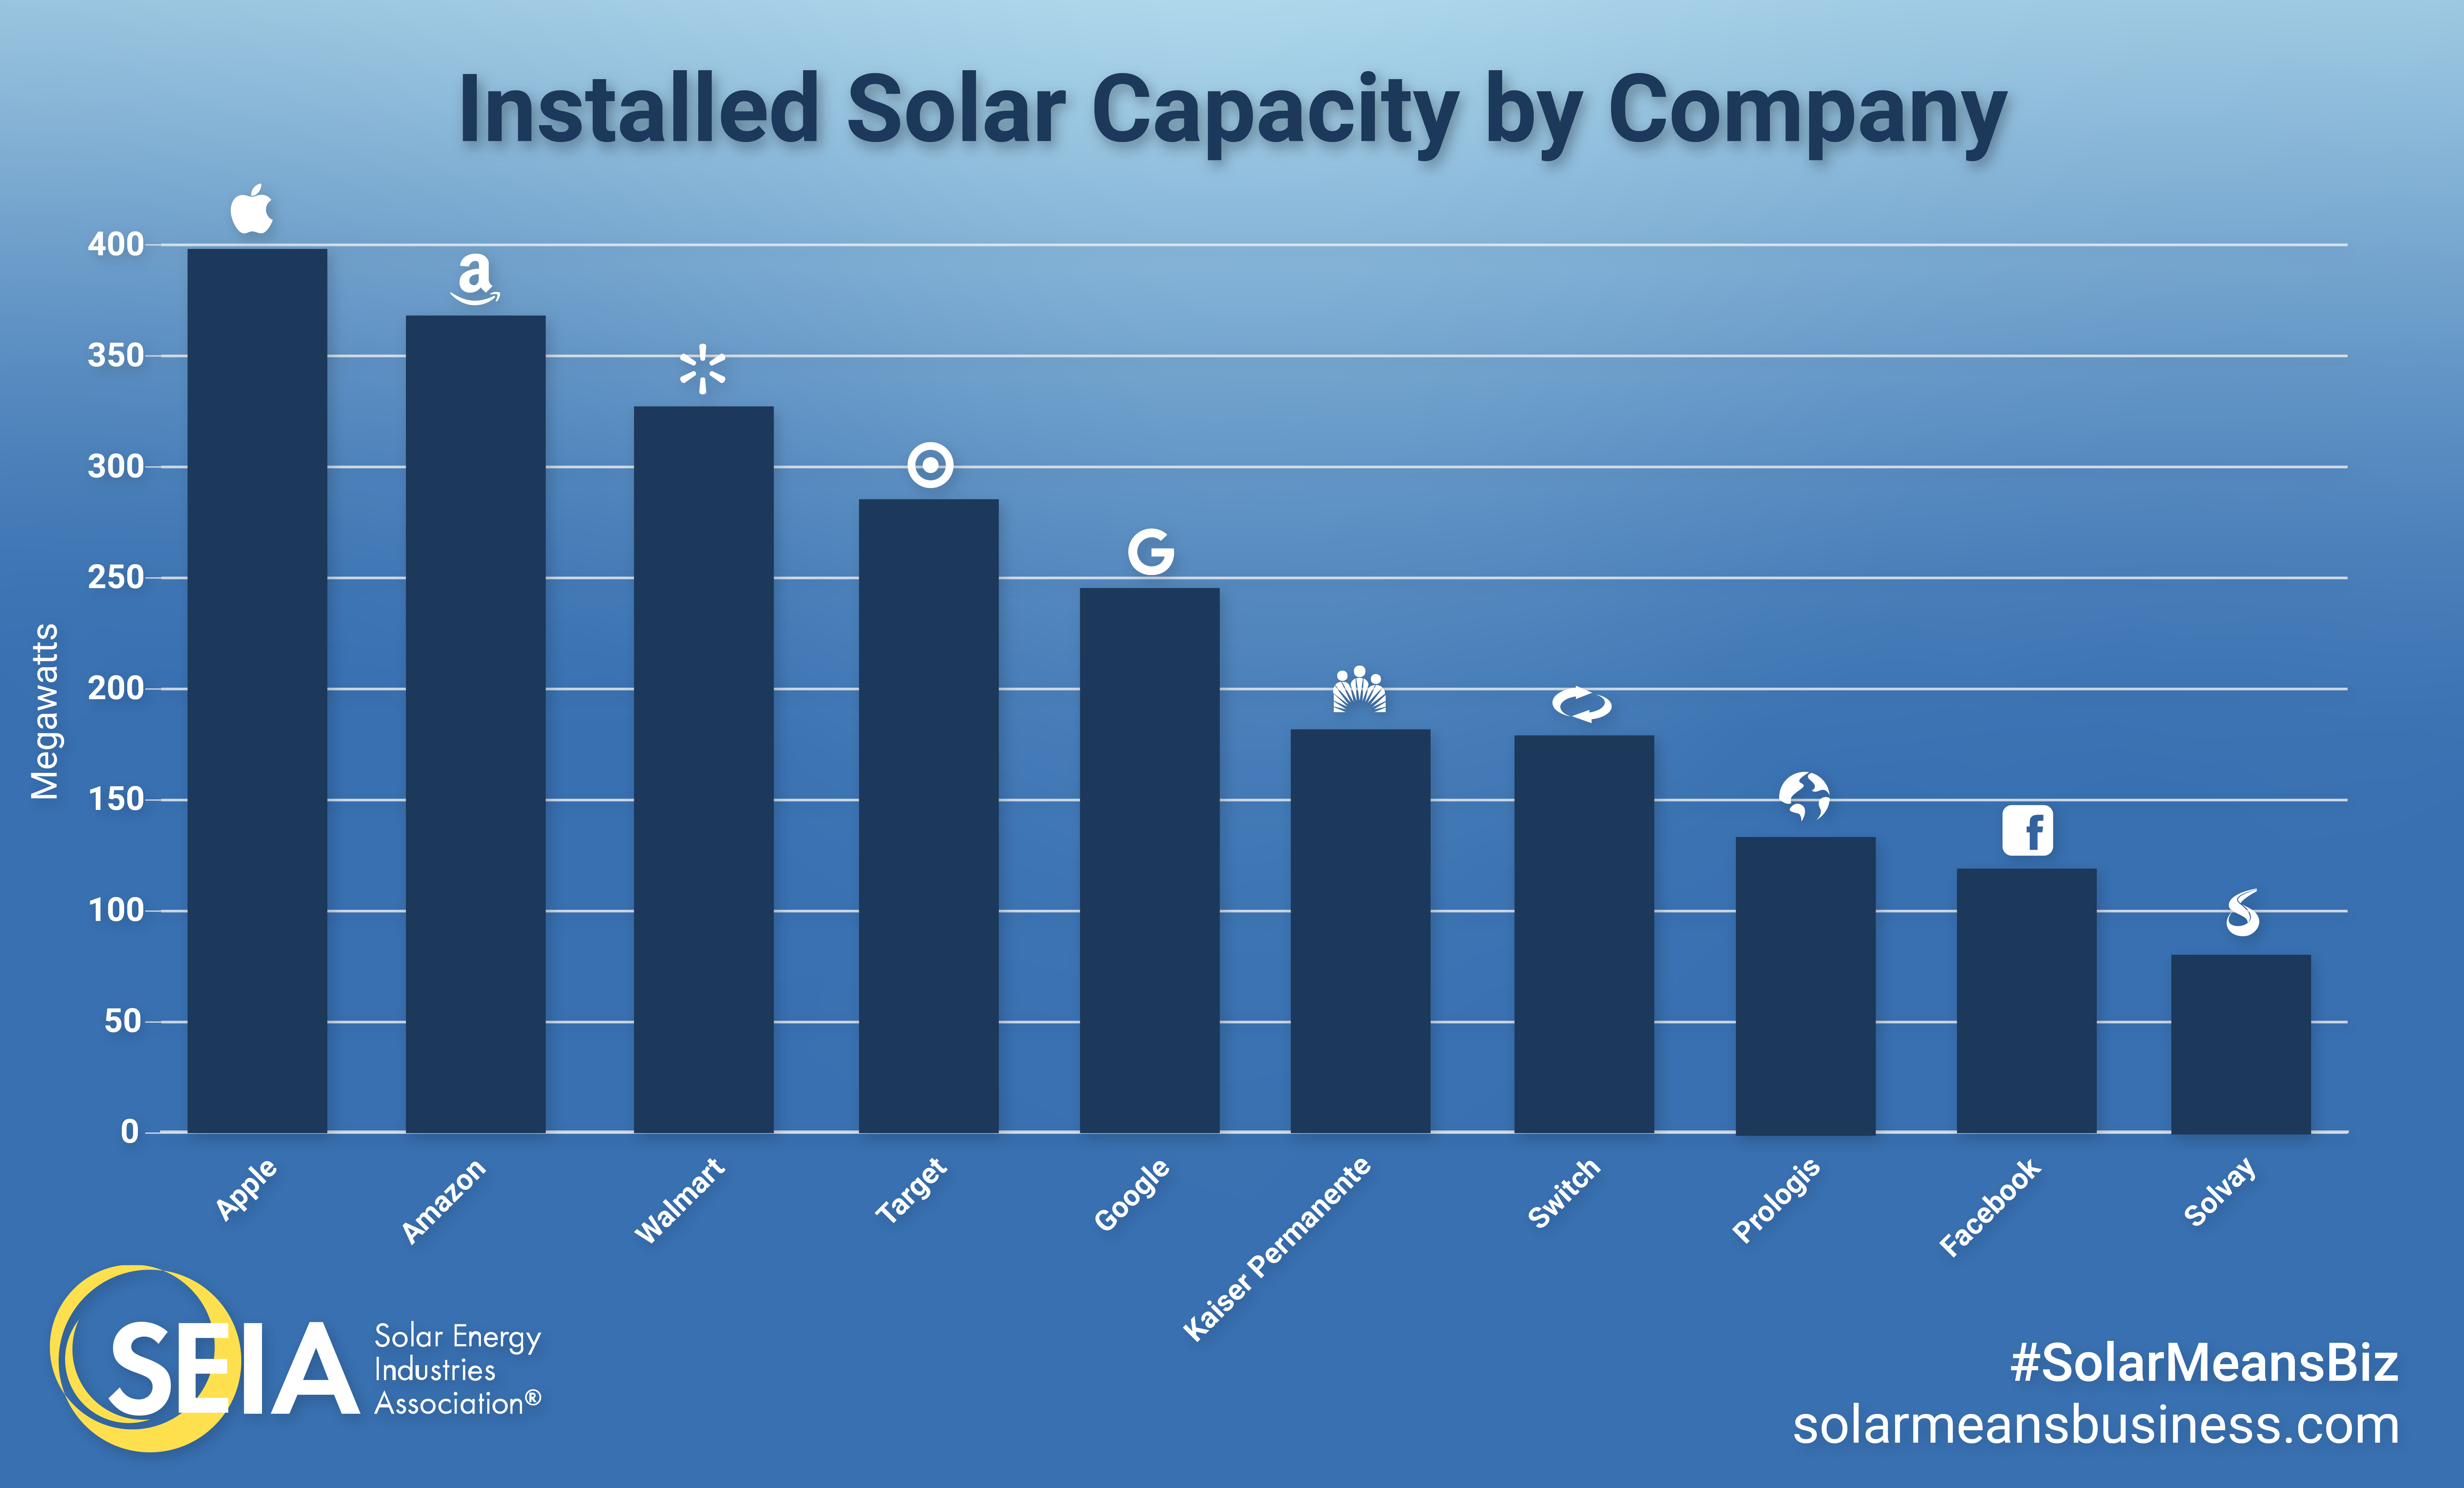 What is the best solar company in the US?